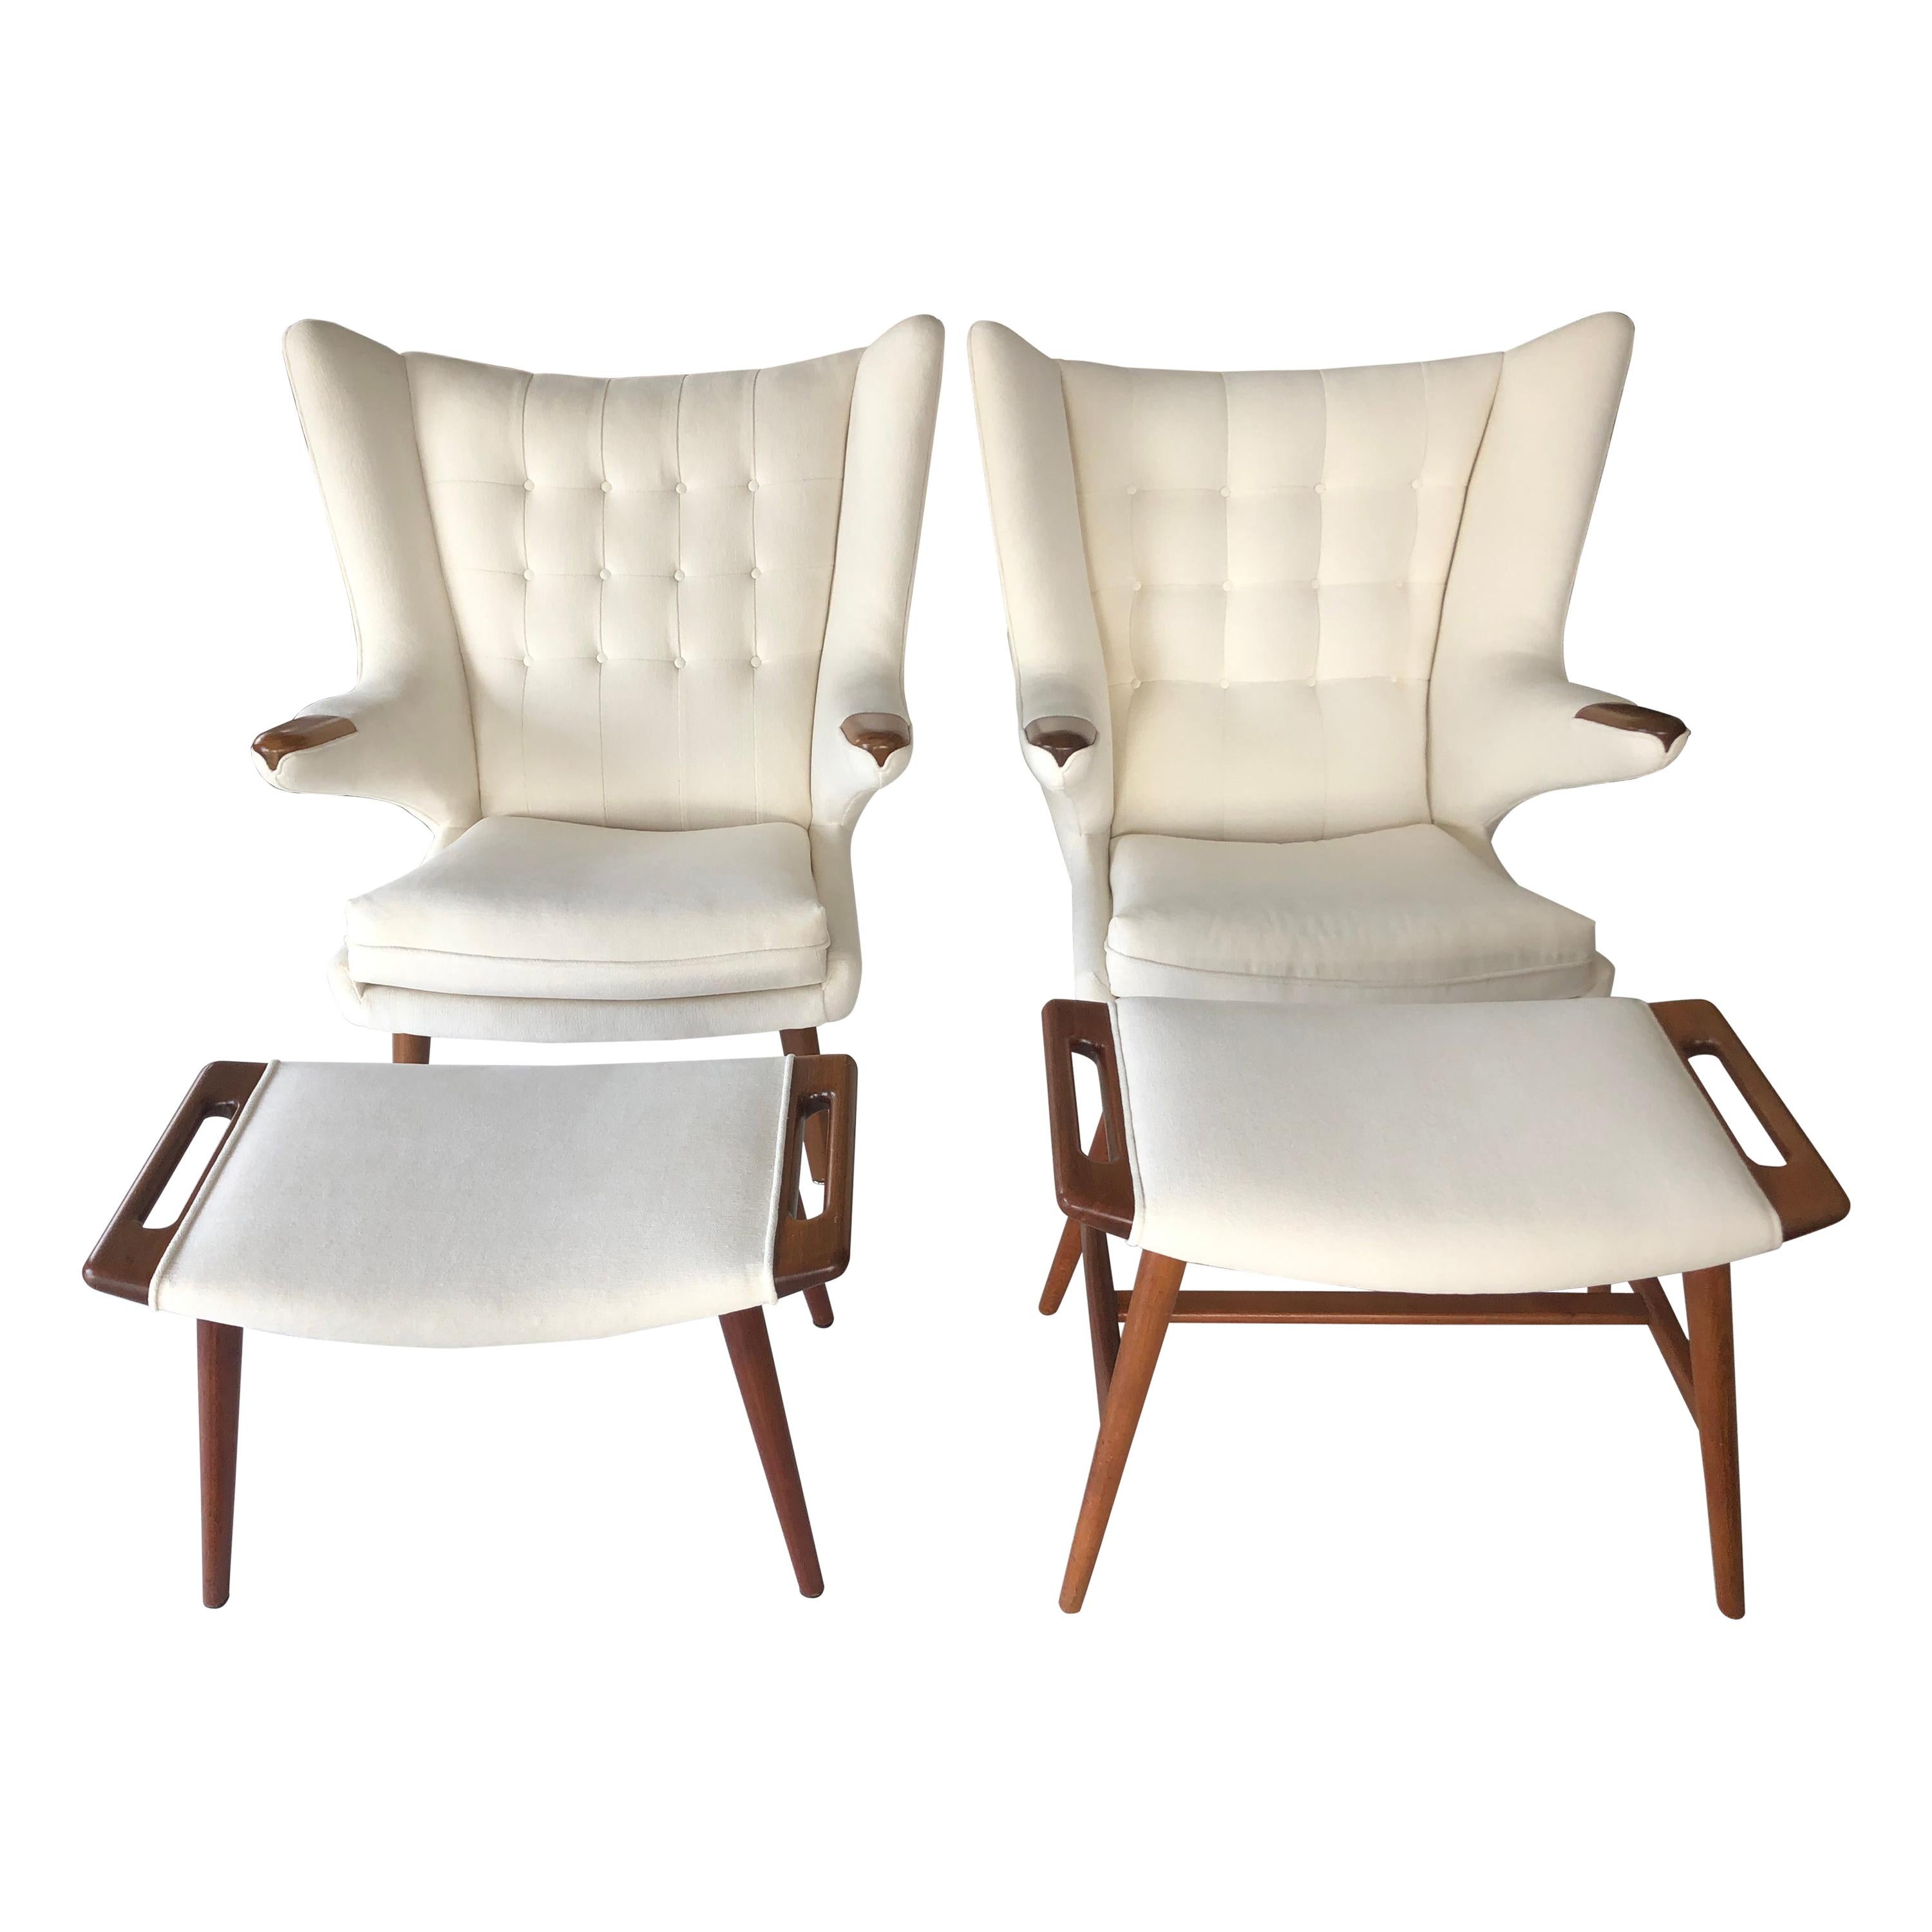 Pair of papa bear chairs with matching ottoman stools by Hans Wegner, Denmark, 1950s. Upholstered in off-white fabric, with stained teak. The price includes one chair and one ottoman. Can be sold individually or as a pair.